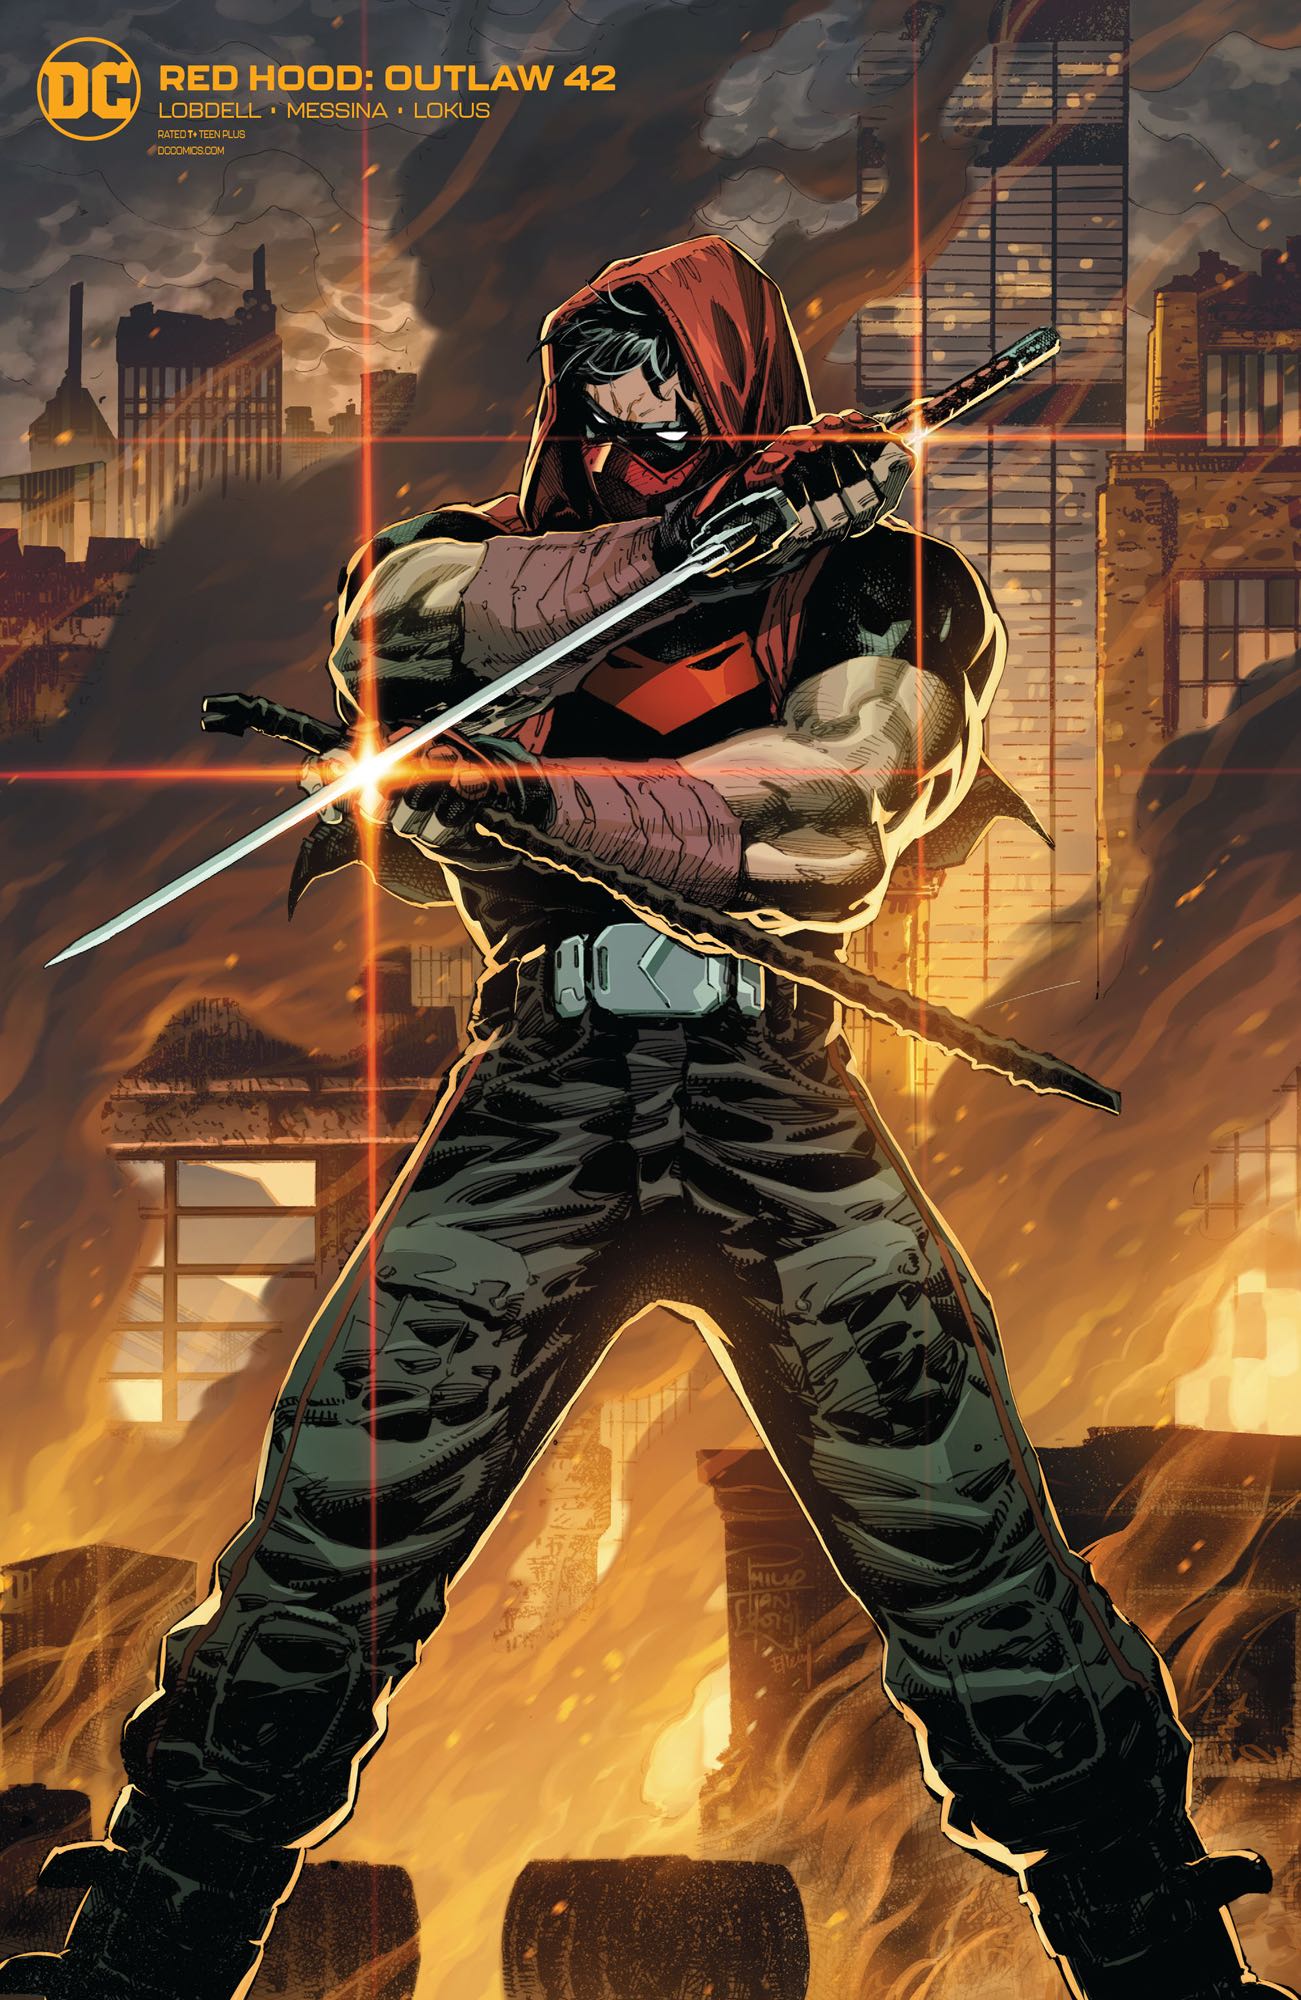 collectibles-details-about-red-hood-outlaw-29-variant-cover-wall